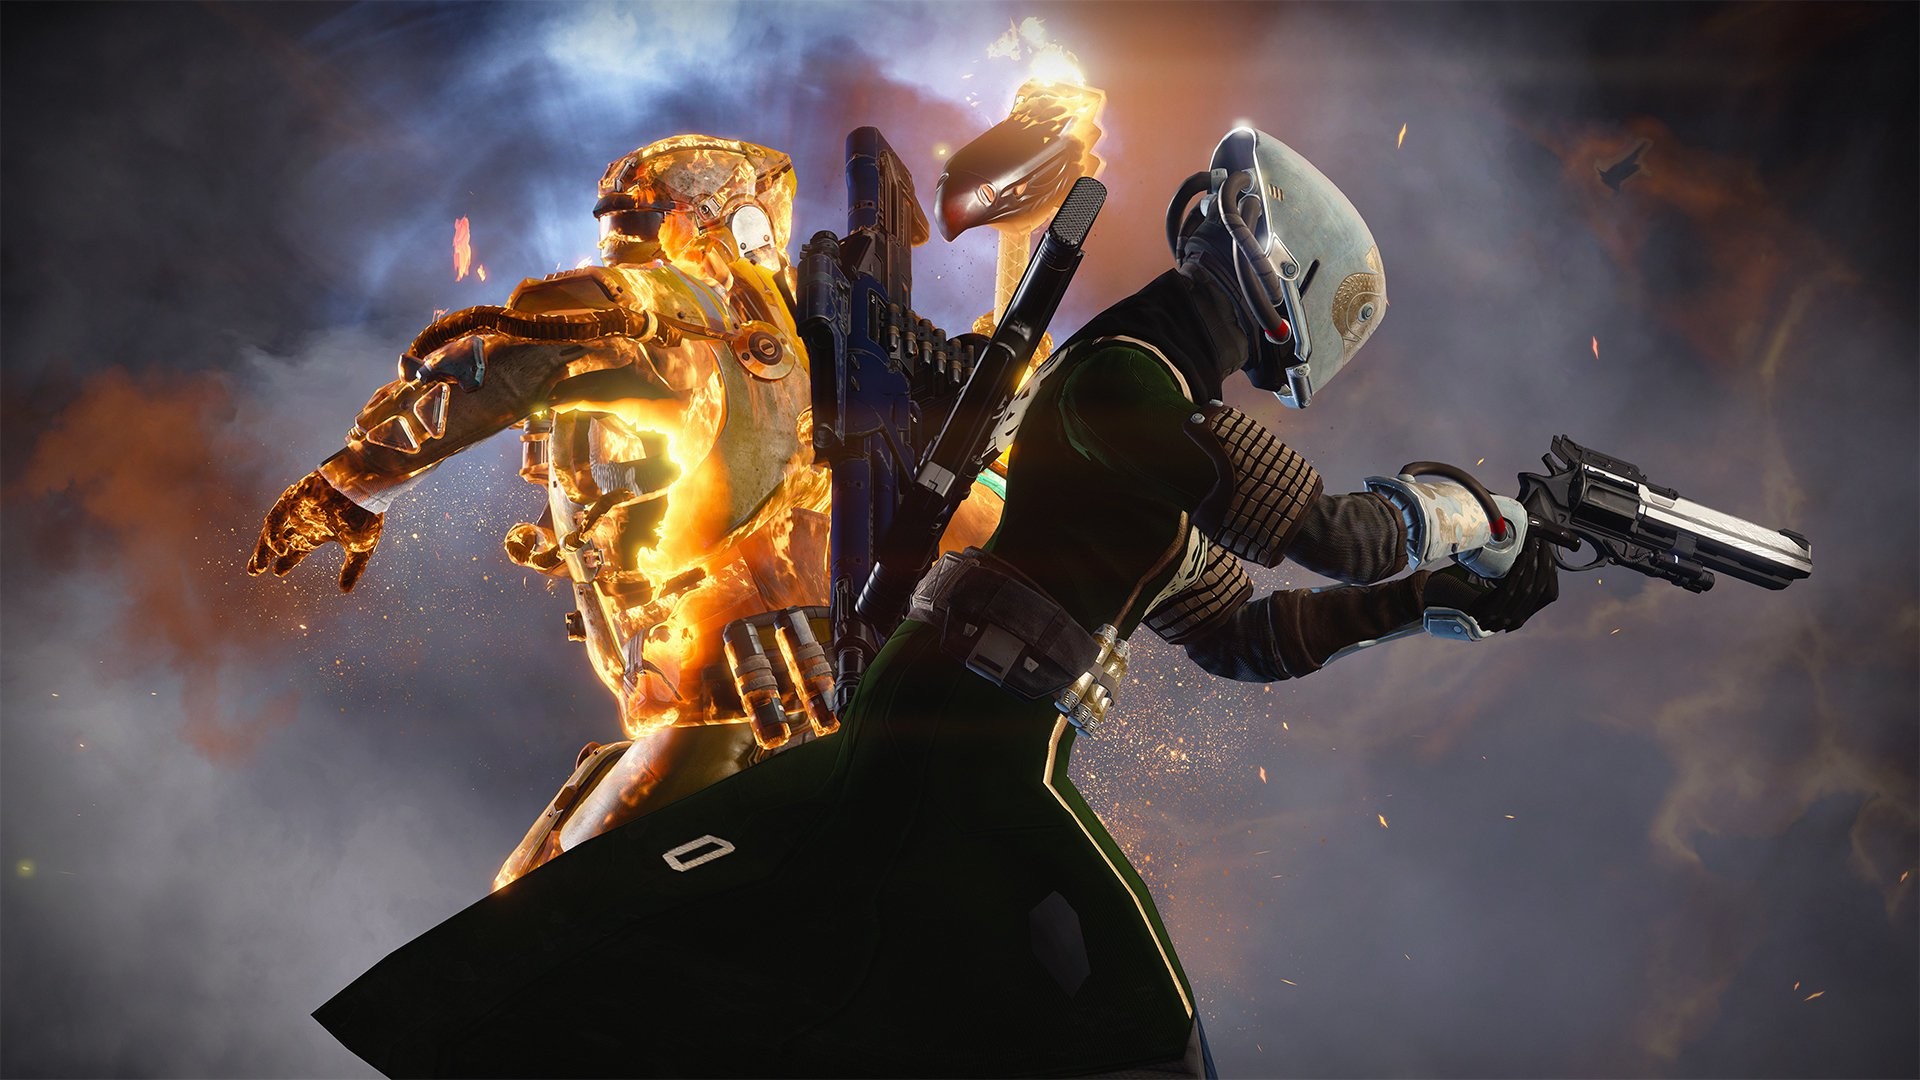 1920x1080 Destiny's Taken King expansion alienates casual fans more than Year One did